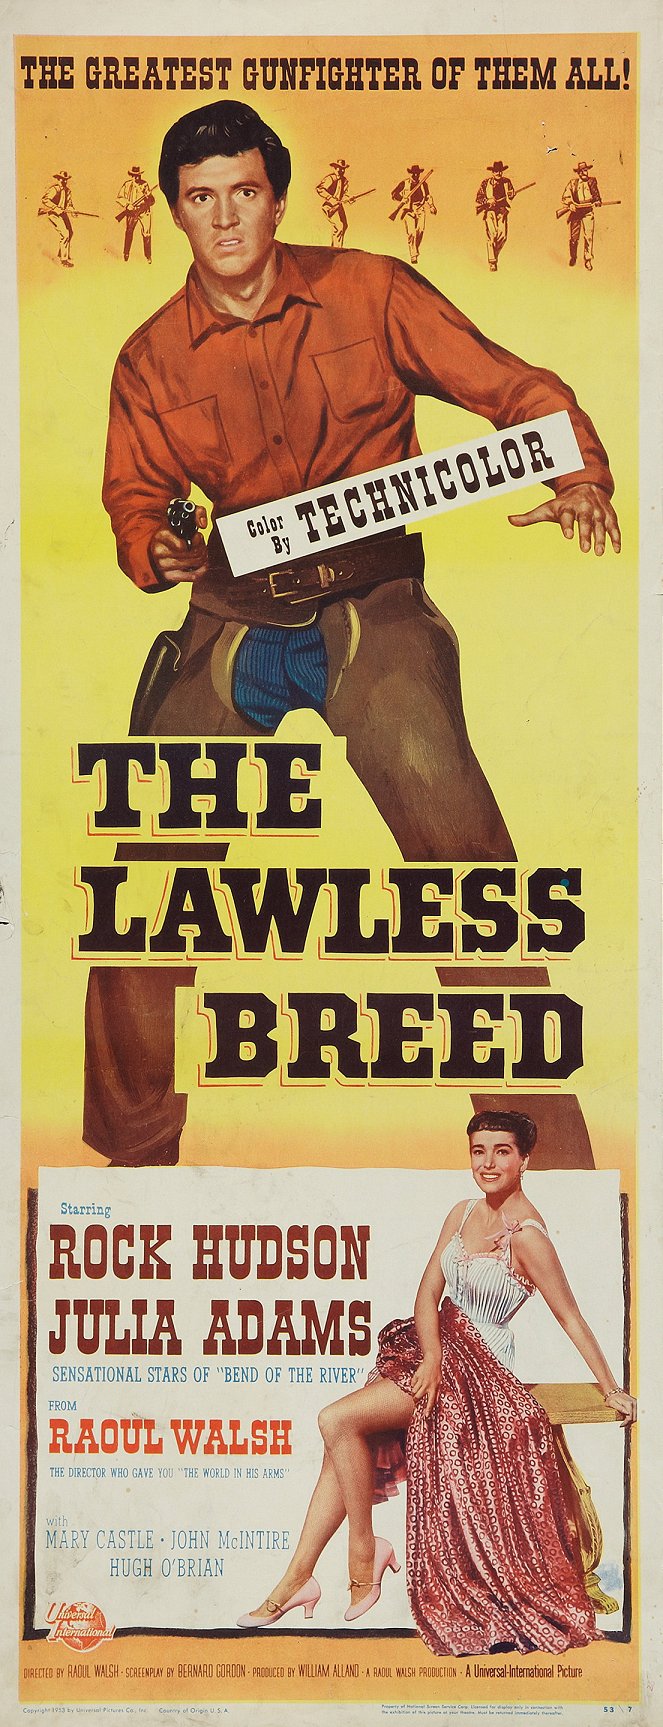 The Lawless Breed - Posters